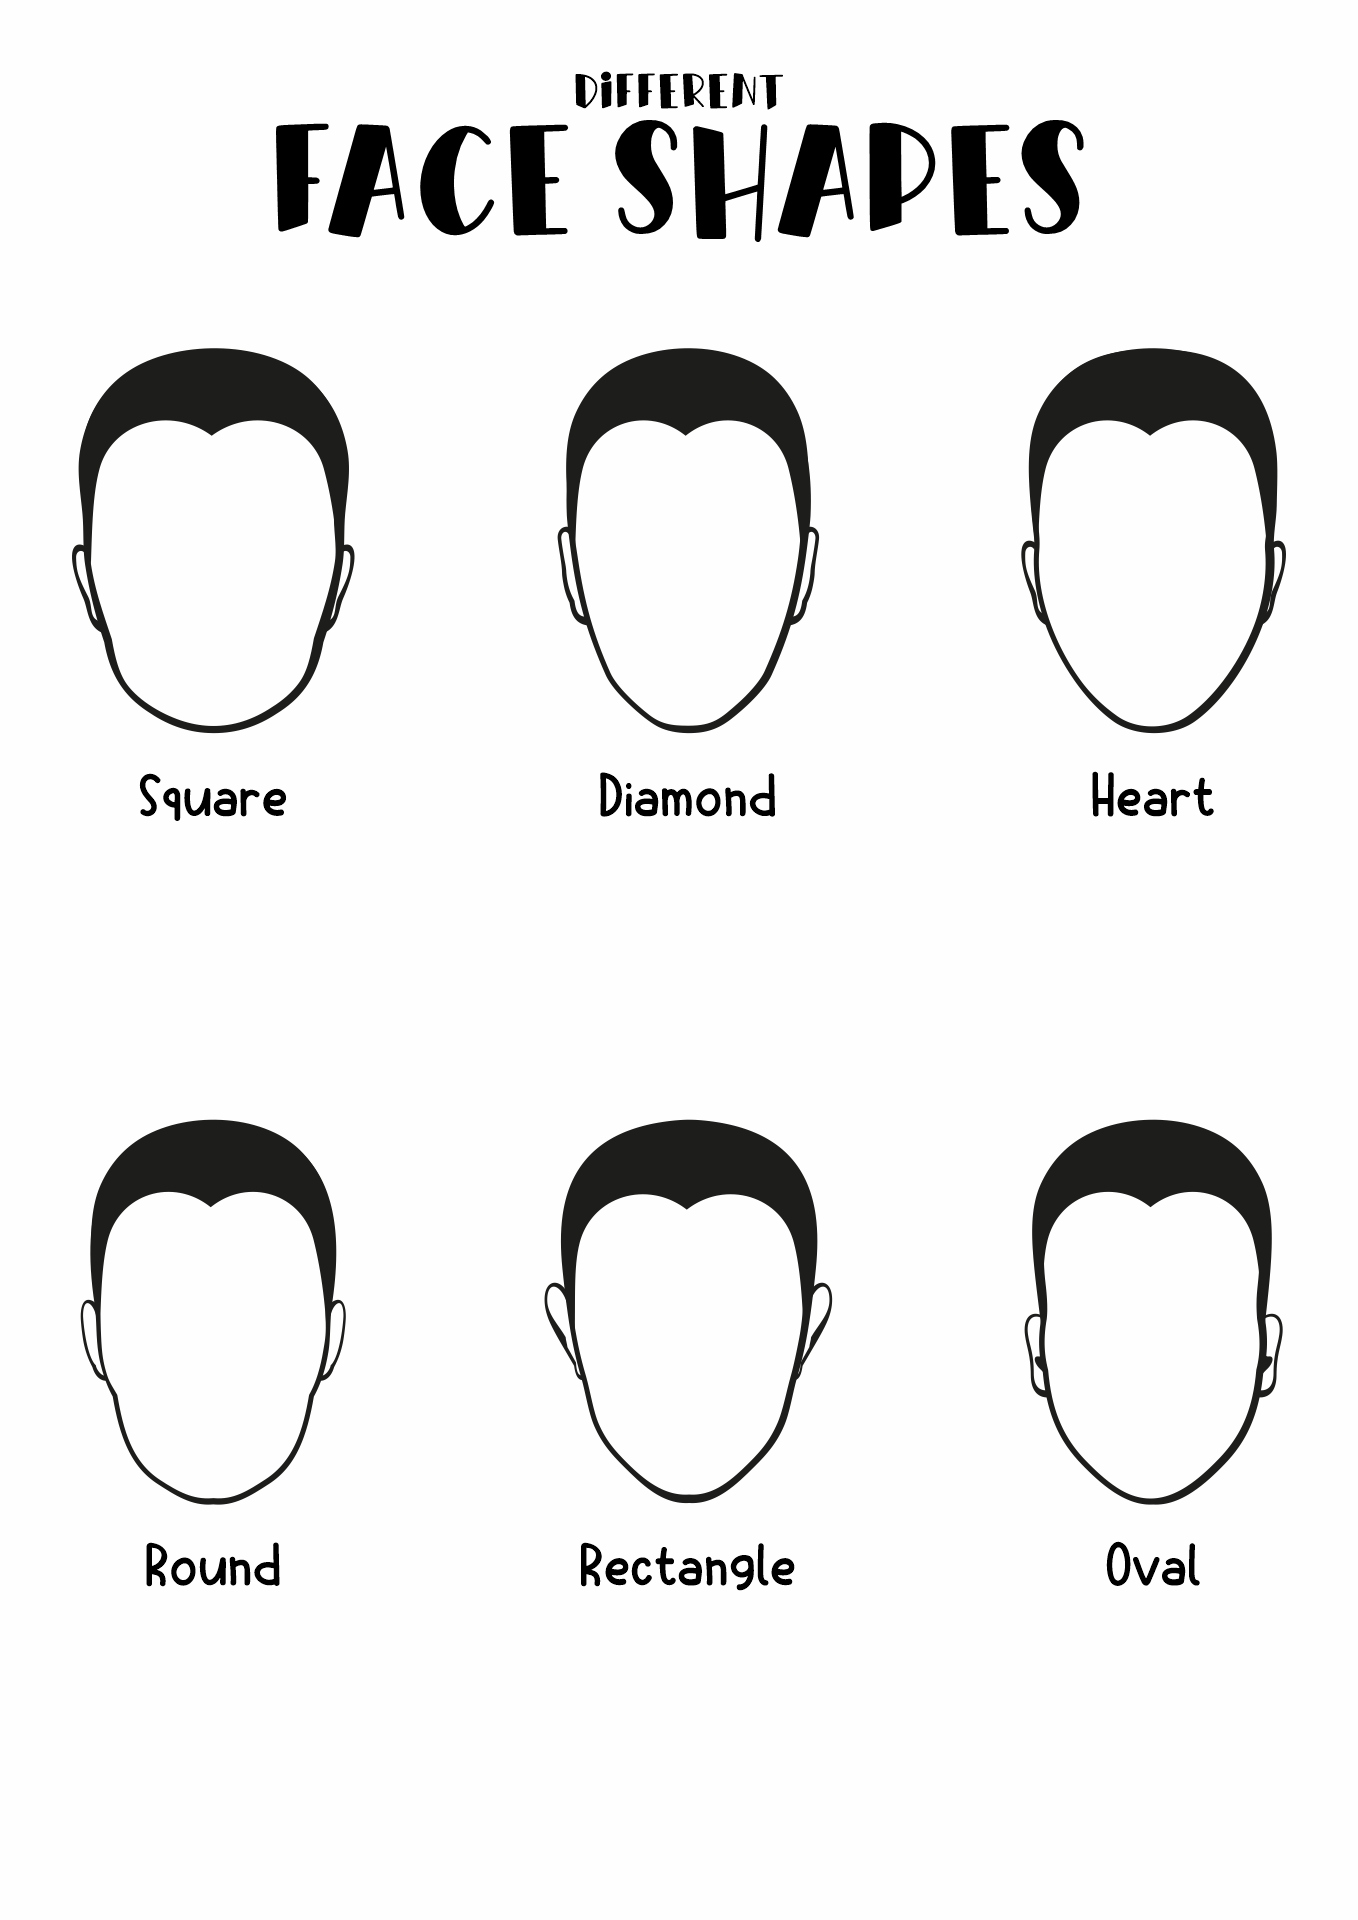 Different Types Of Face Shapes